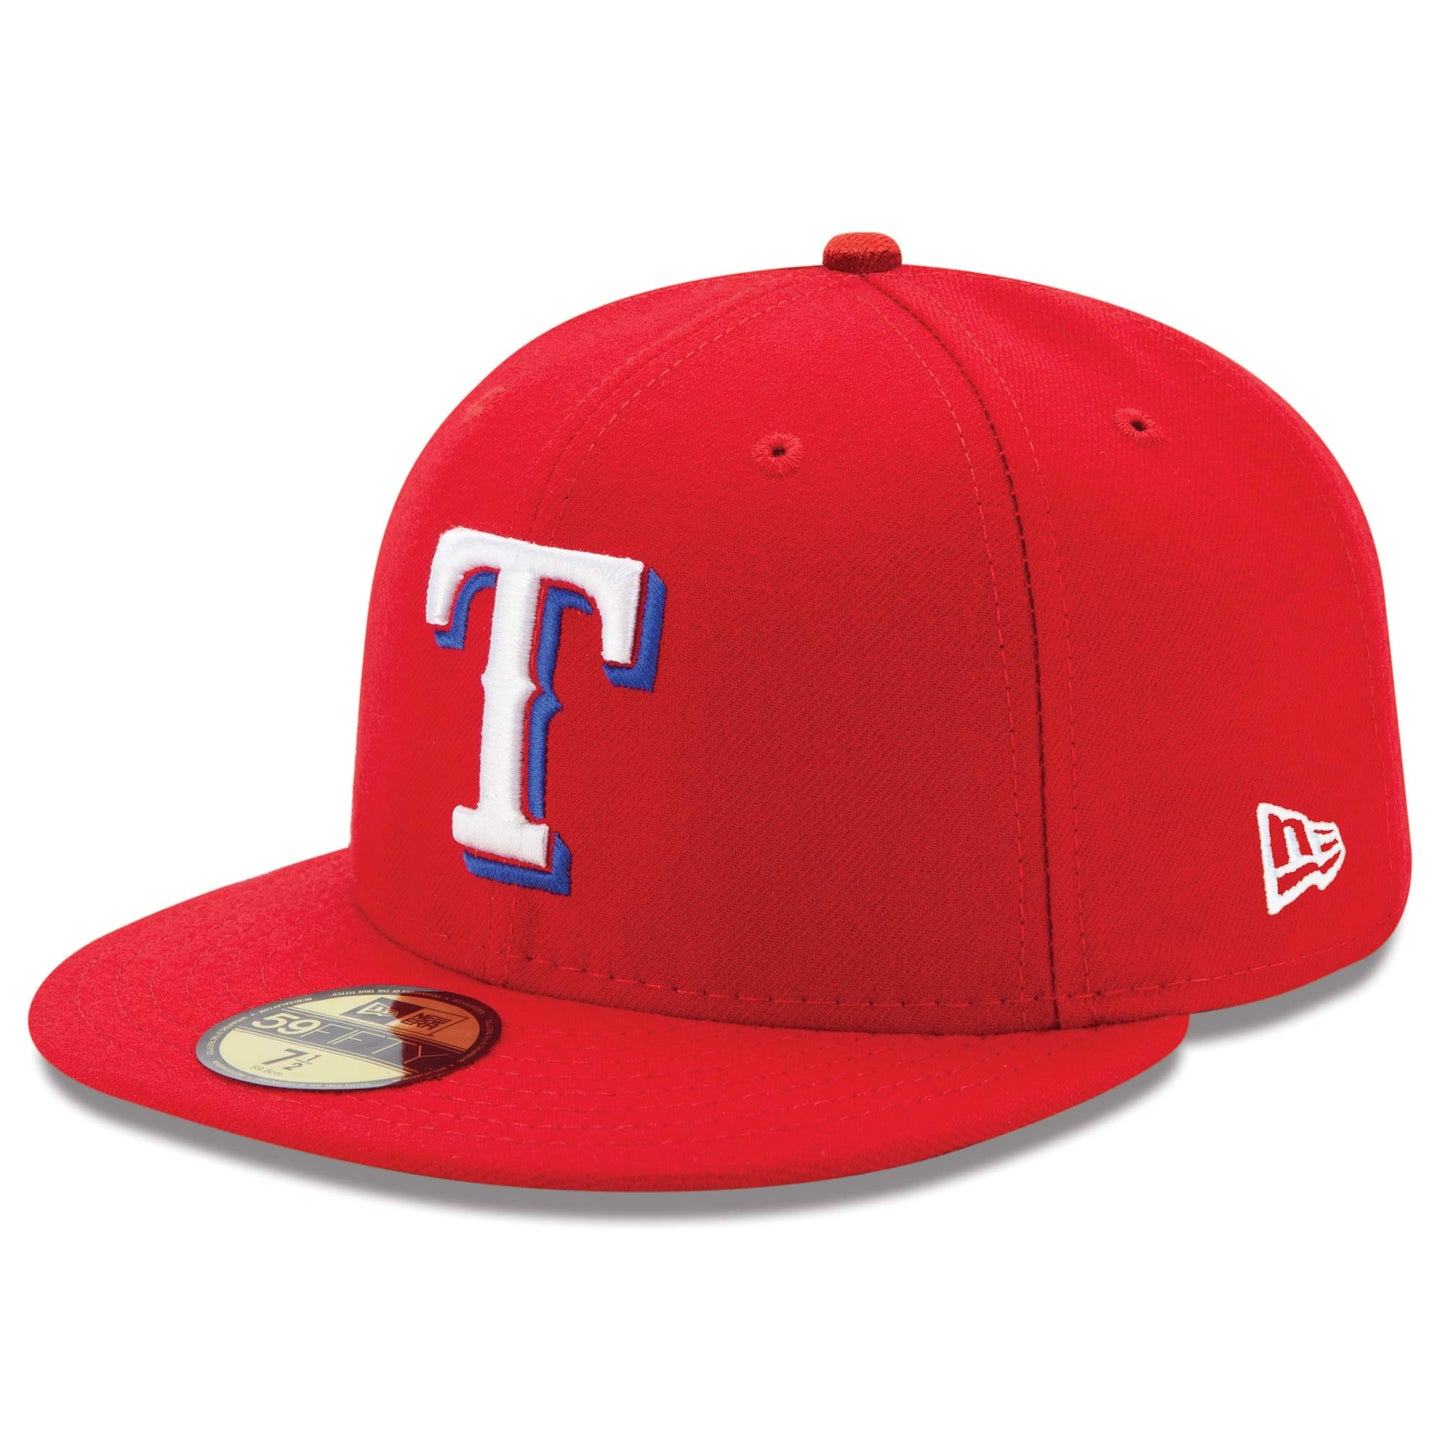 Texas Rangers New Era Alternate Authentic Collection On-Field 59FIFTY Fitted Hat - Red